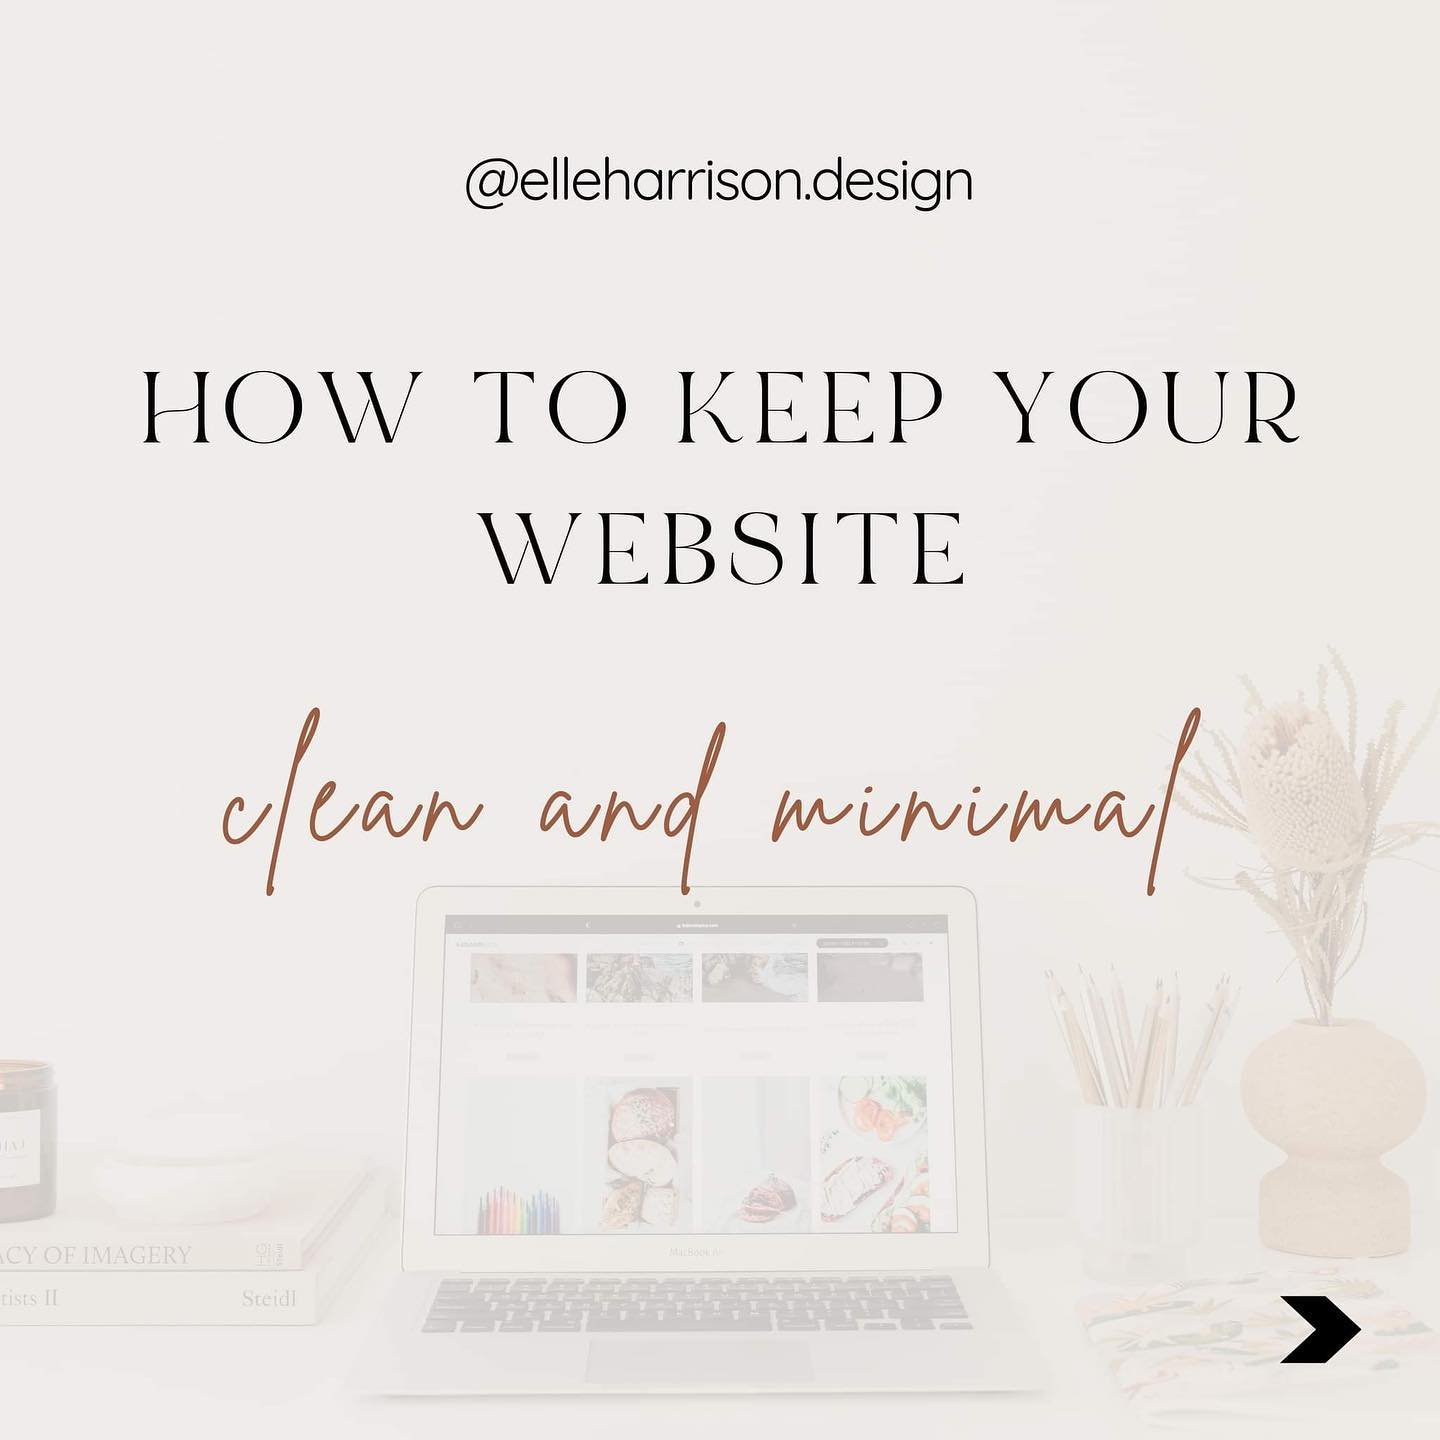 It&rsquo;s no secret that I&rsquo;m a huge fan of minimal, clean websites and overall design. 

There&rsquo;s just something about the simplicity and elegance of it that truly speaks to me.

One of the reasons I love designing websites in this style 